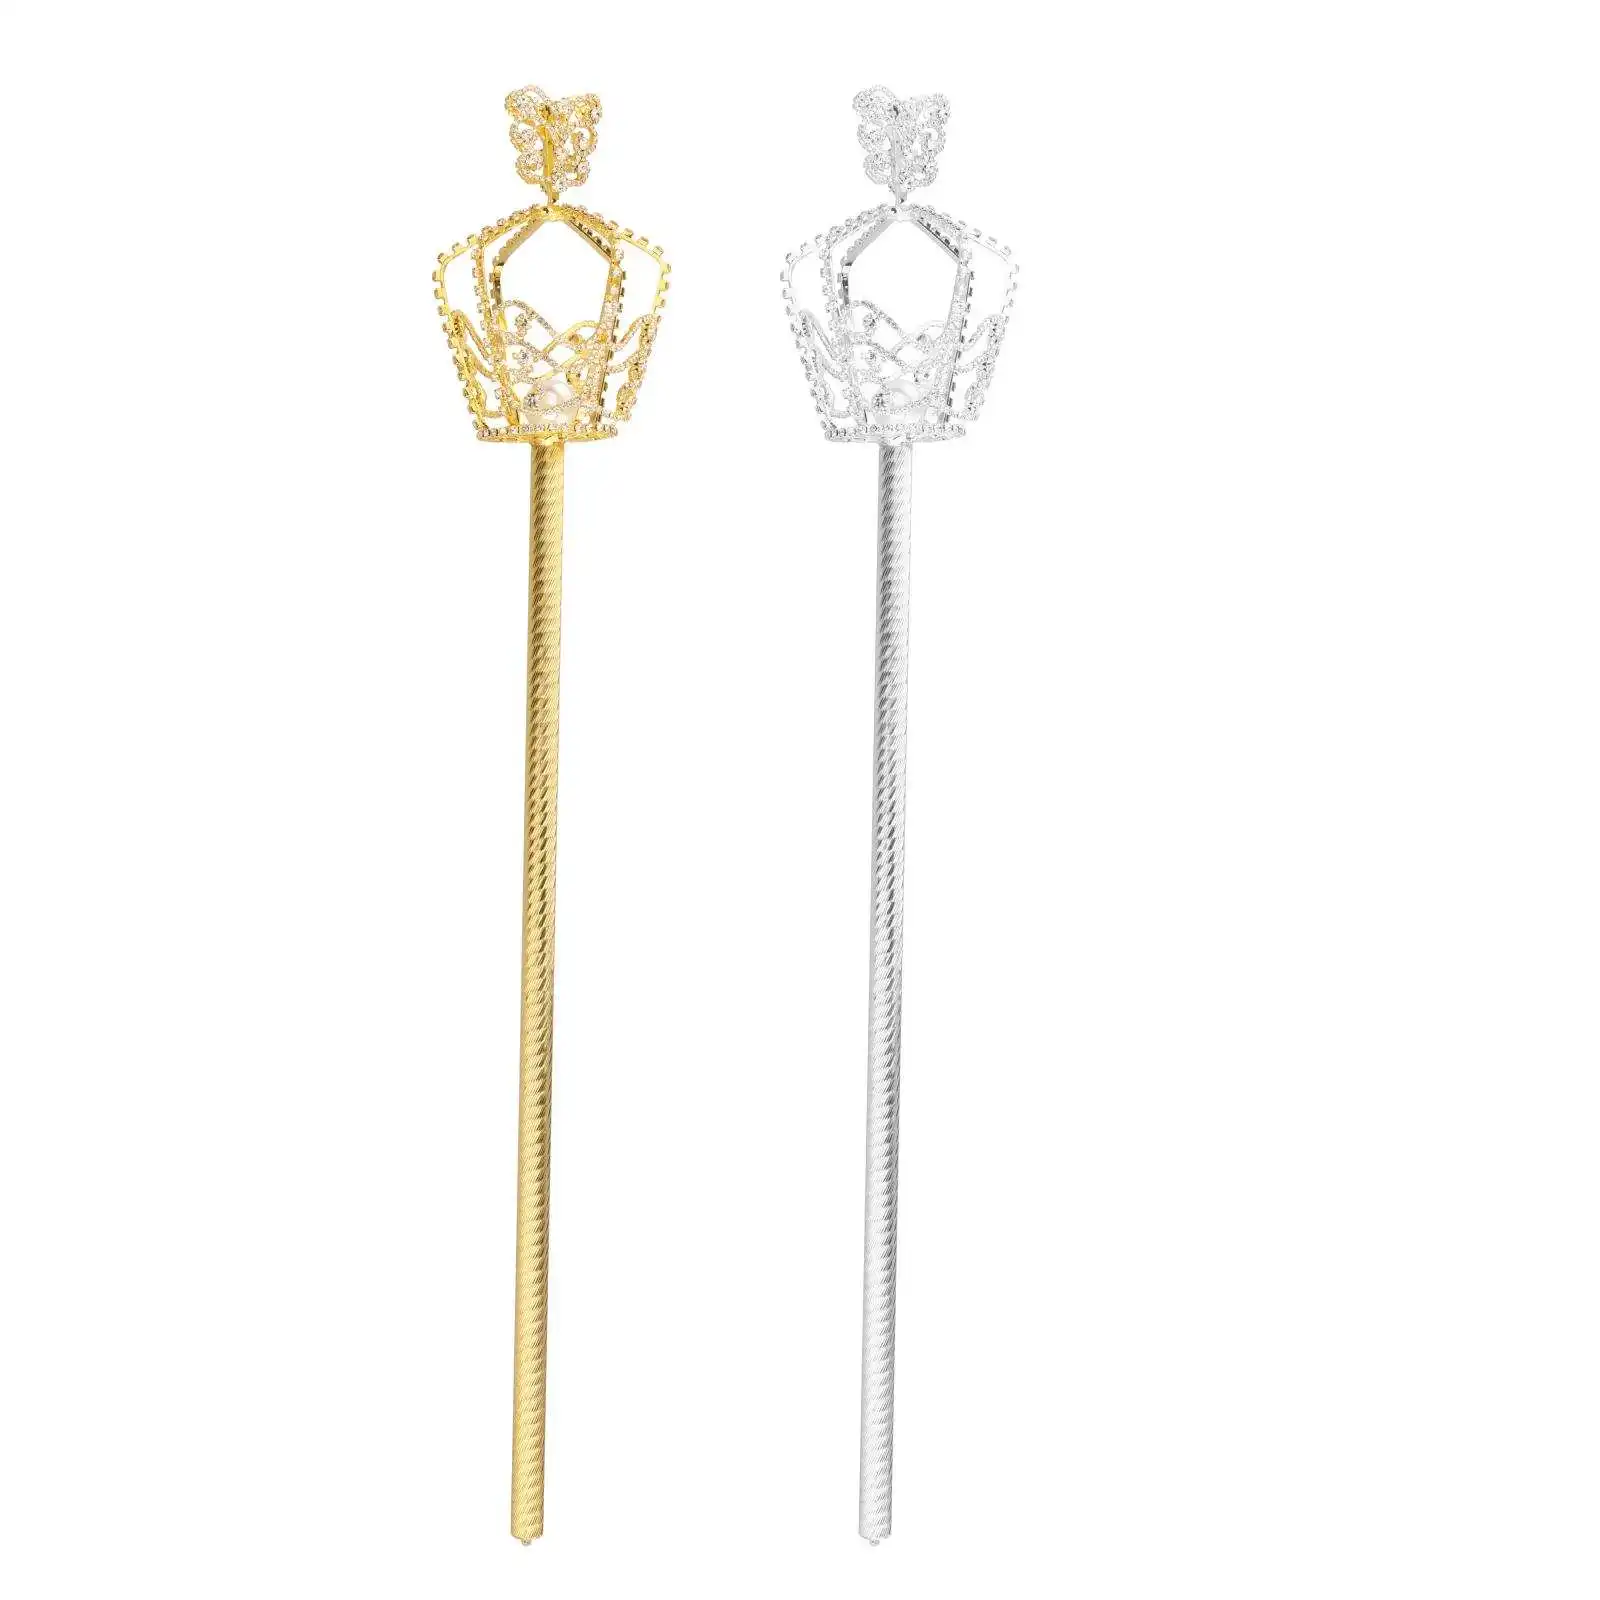 Bling Crystal Scepter Wand Gold/Silver Color Tiaras and Crowns Sceptre King Queen Wedding Pageant Party Costumes Handheld Props